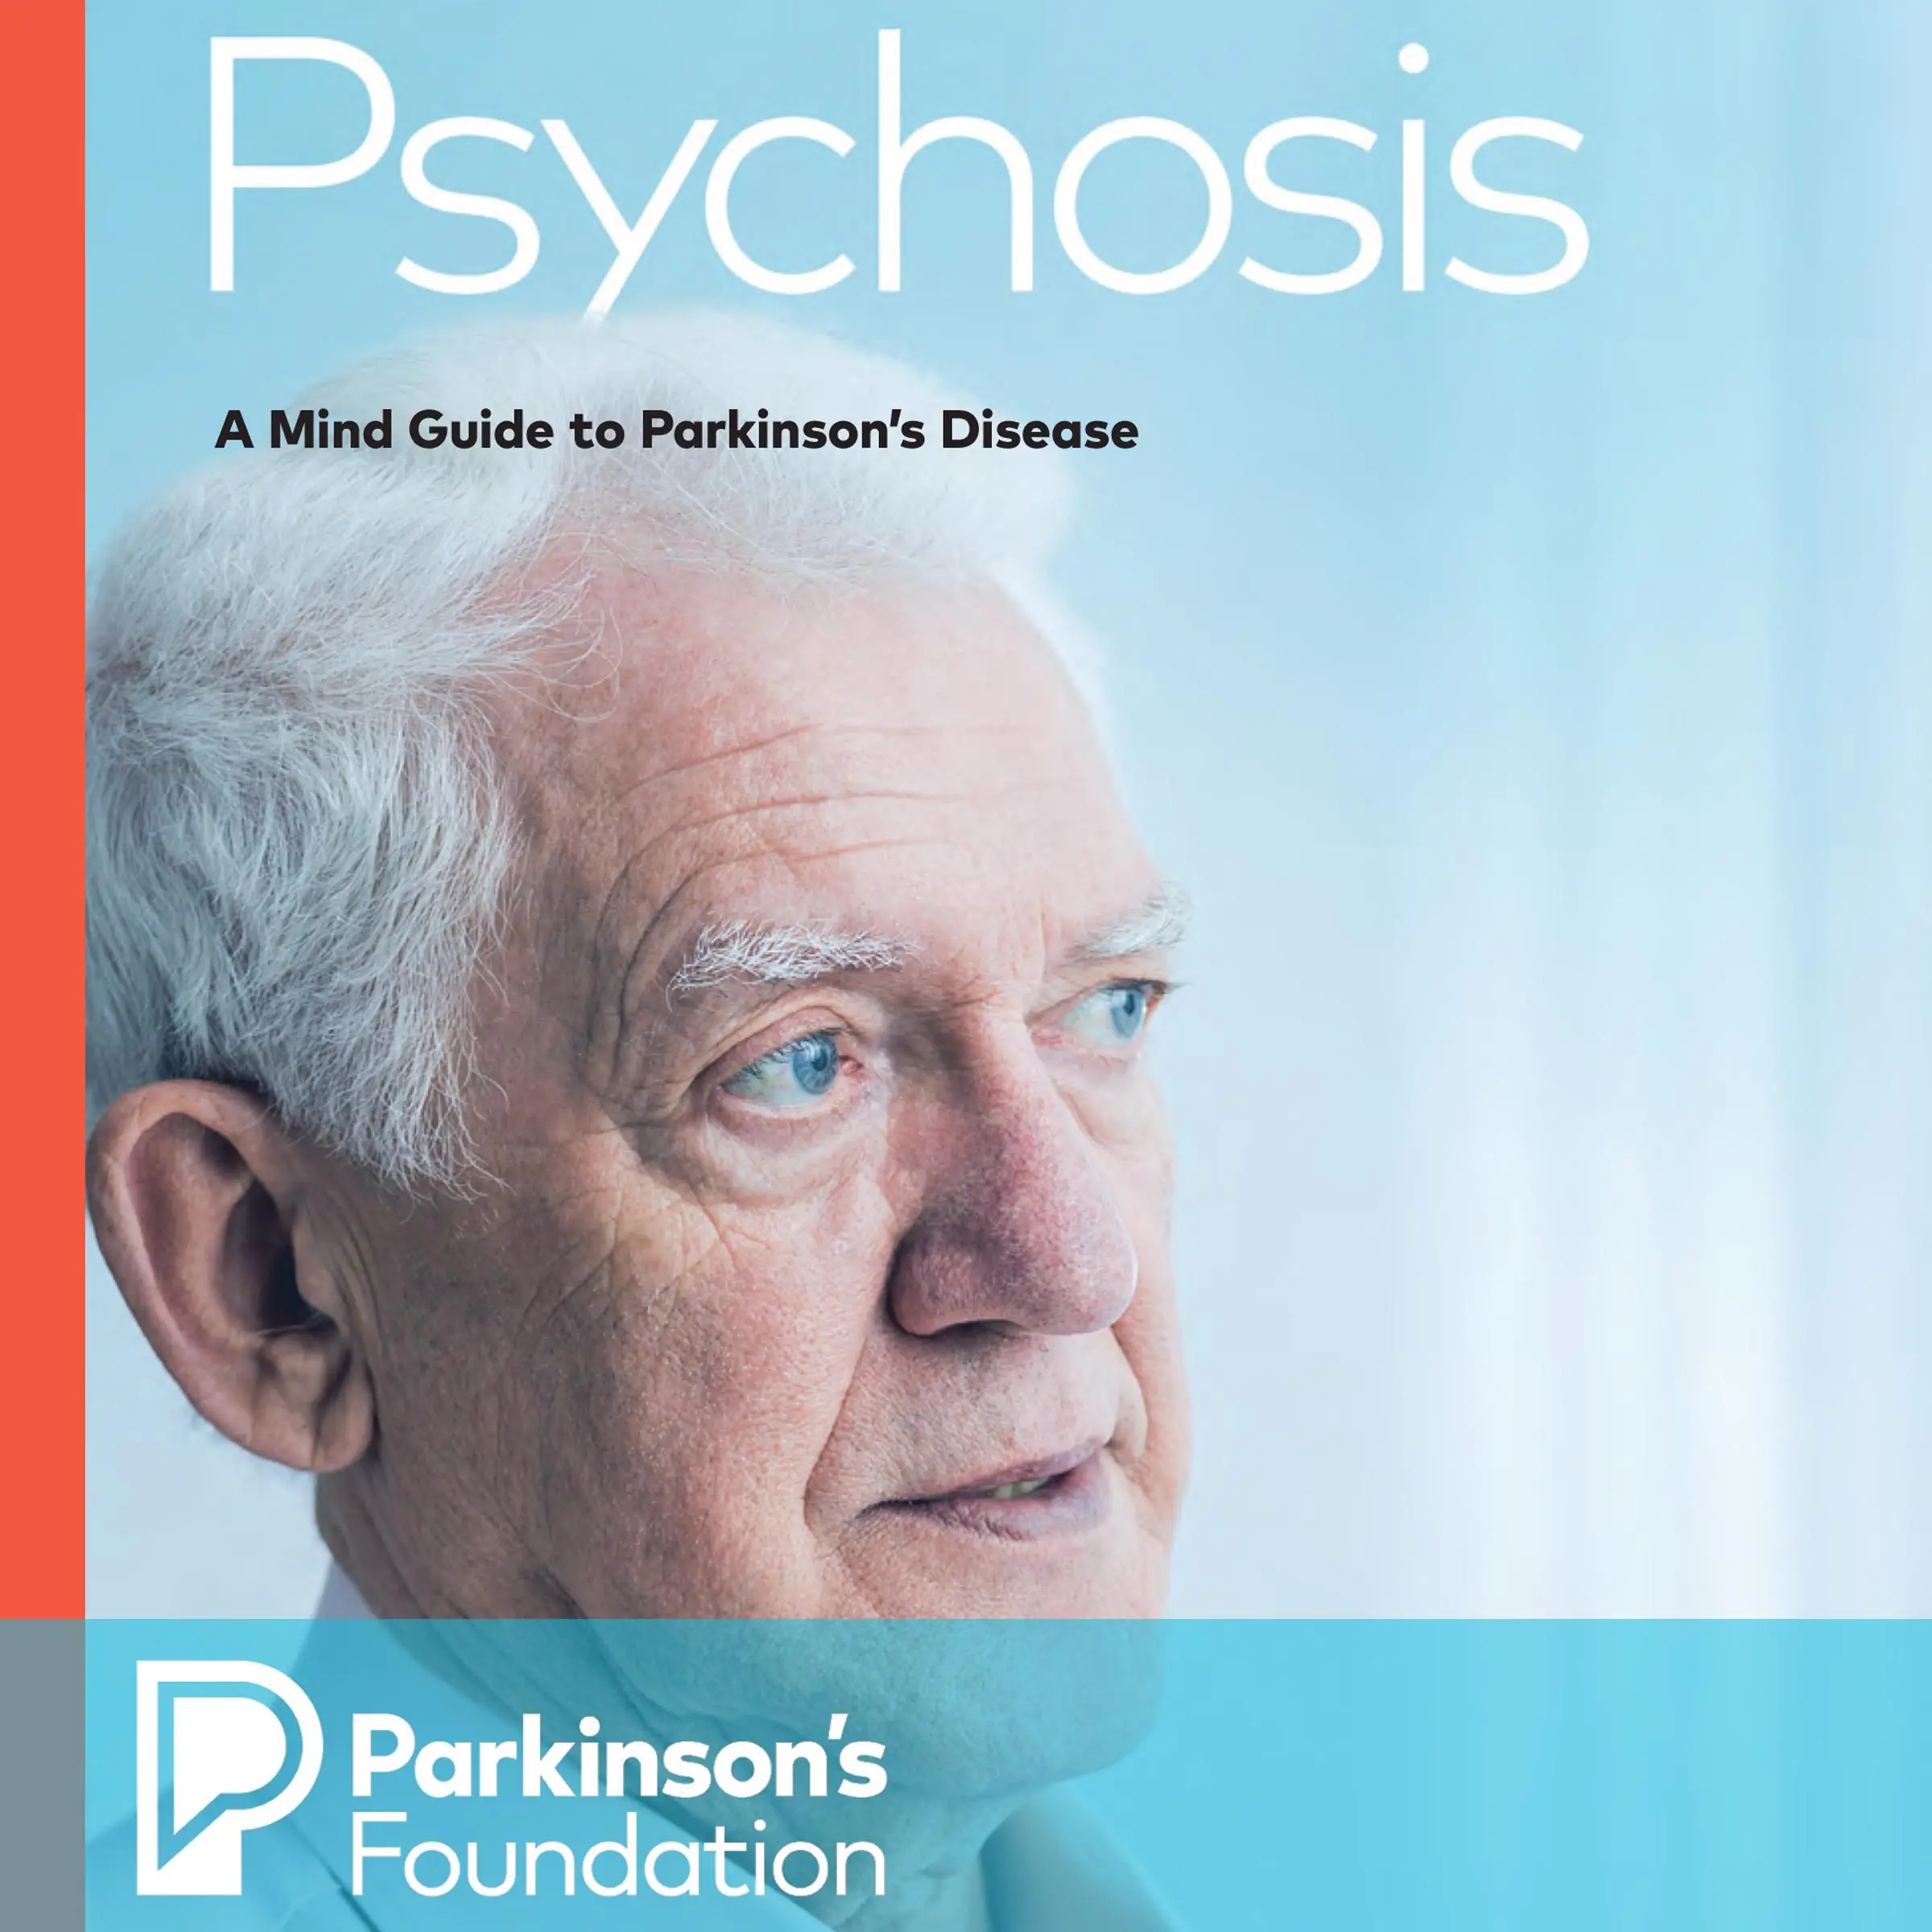 Psychosis: A Mind Guide to Parkinson's Disease Audiobook by Parkinson's Foundation